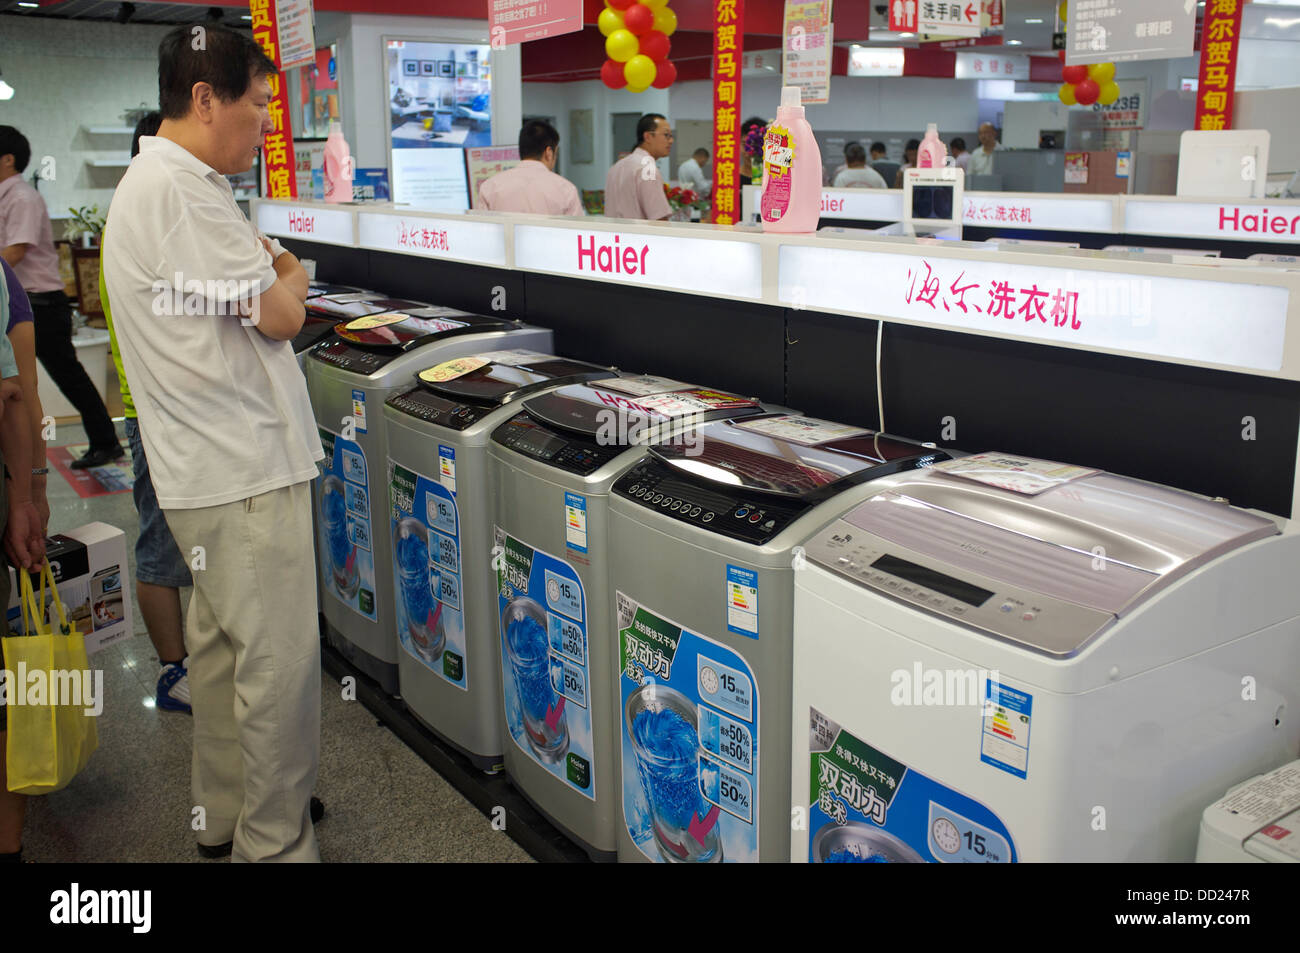 Haier washing machines are on sale in a Gome electrical appliances store in Beijing, China. 2013 Stock Photo